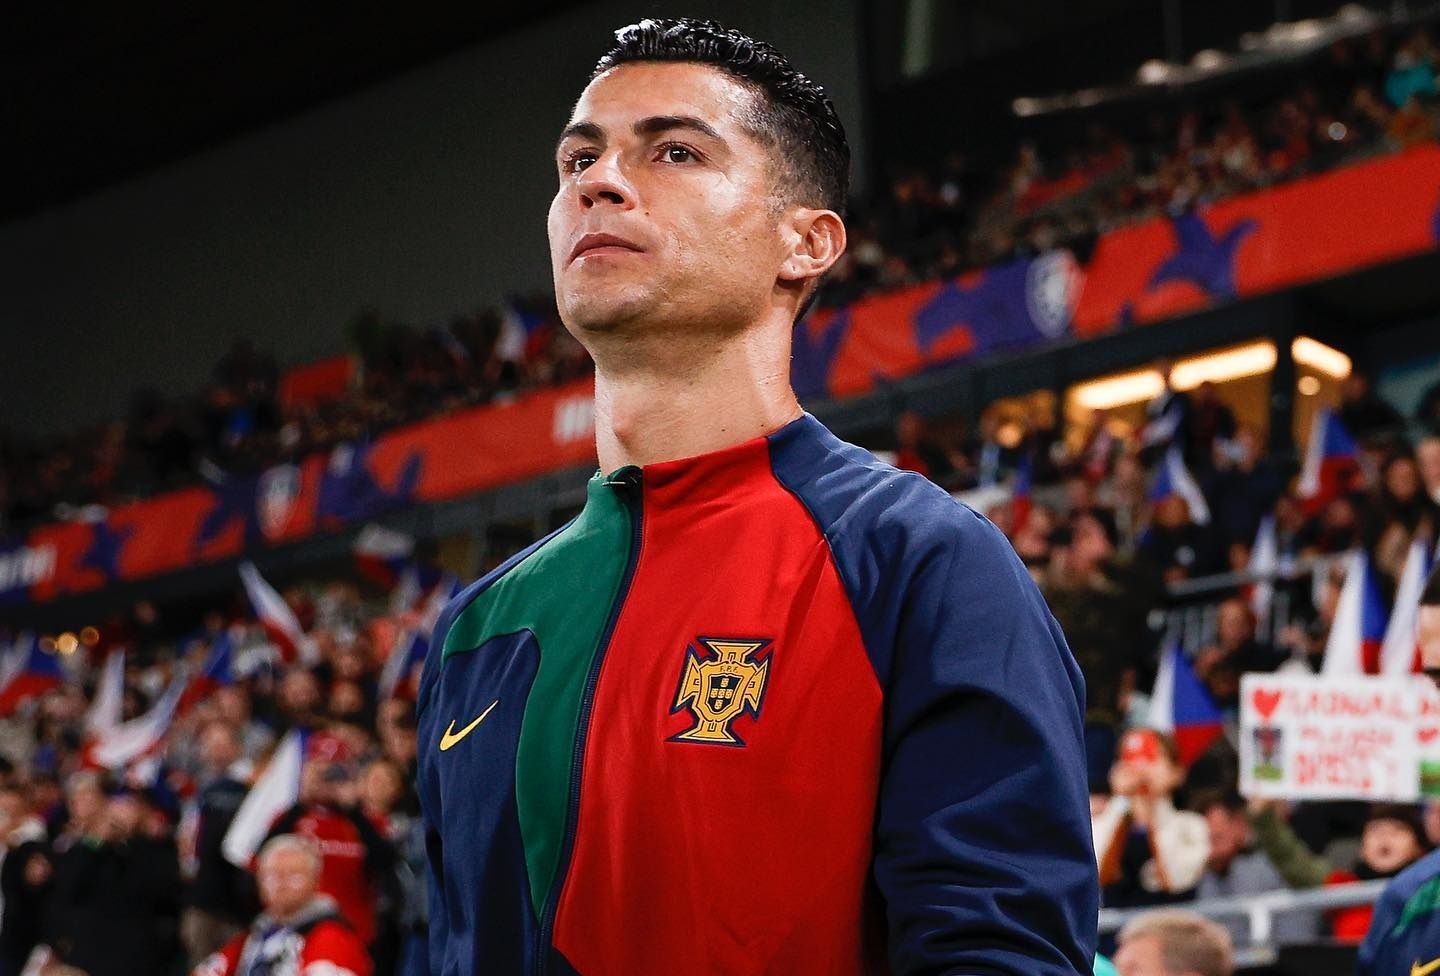 Cristiano Ronaldos net worth and most expensive things he owns